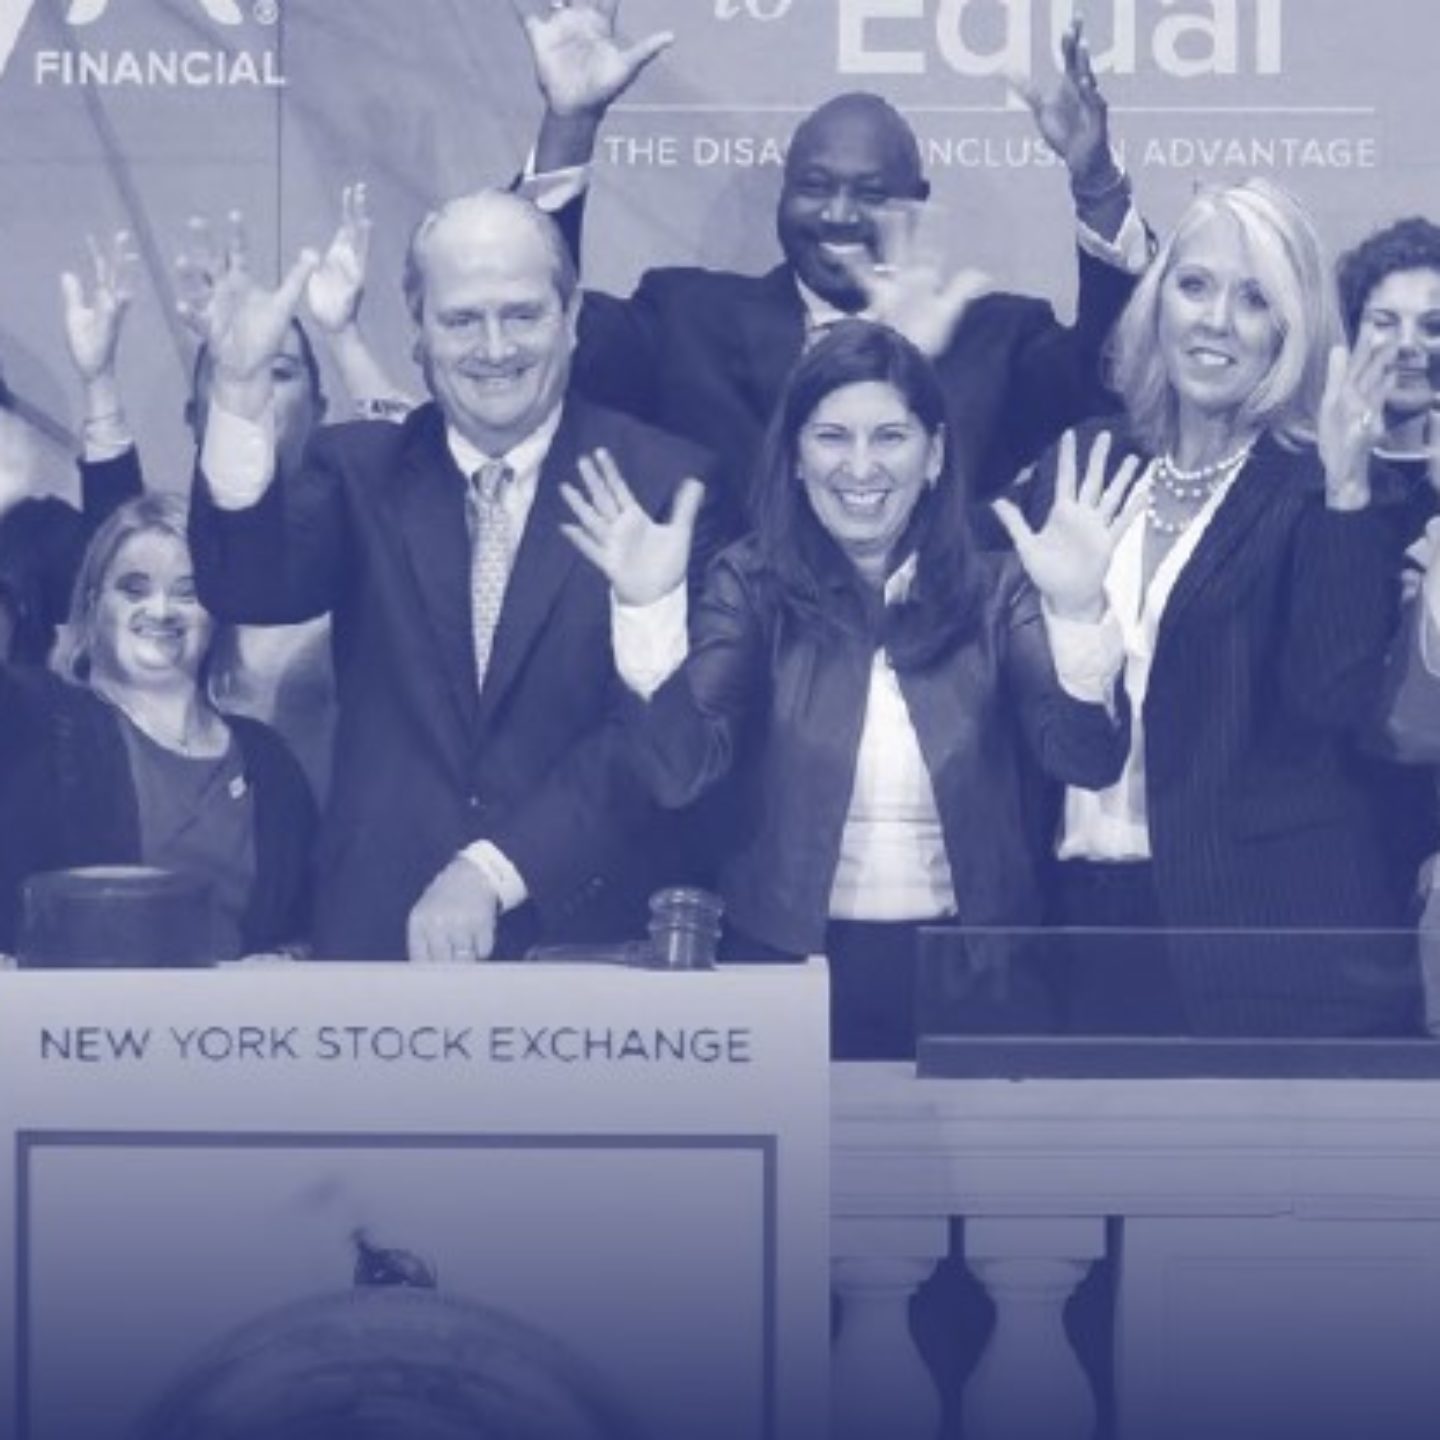 Business professionals standing at NYSE ringing bell